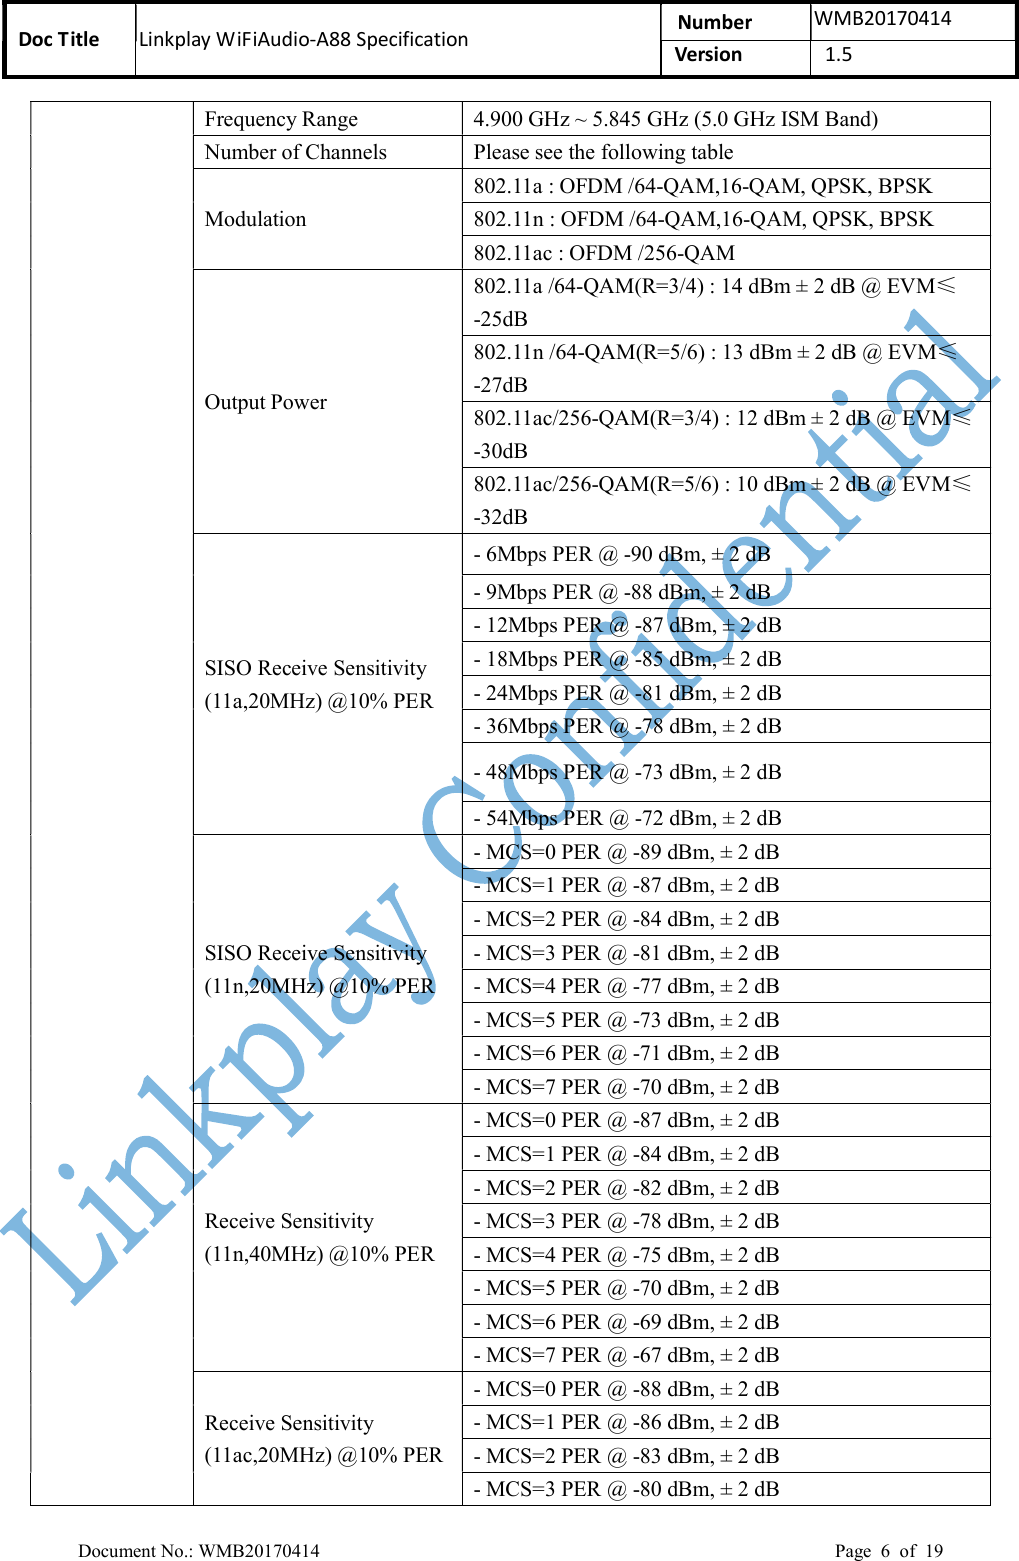 Doc Title  Linkplay WiFiAudio-A88 Specification  Number  WMB20170414 Version    1.5  Document No.: WMB20170414    Page  6  of  19 Frequency Range  4.900 GHz ~ 5.845 GHz (5.0 GHz ISM Band) Number of Channels  Please see the following table Modulation 802.11a : OFDM /64-QAM,16-QAM, QPSK, BPSK 802.11n : OFDM /64-QAM,16-QAM, QPSK, BPSK 802.11ac : OFDM /256-QAM Output Power 802.11a /64-QAM(R=3/4) : 14 dBm ± 2 dB @ EVM≤-25dB 802.11n /64-QAM(R=5/6) : 13 dBm ± 2 dB @ EVM≤-27dB 802.11ac/256-QAM(R=3/4) : 12 dBm ± 2 dB @ EVM≤-30dB 802.11ac/256-QAM(R=5/6) : 10 dBm ± 2 dB @ EVM≤-32dB SISO Receive Sensitivity (11a,20MHz) @10% PER - 6Mbps PER @ -90 dBm, ± 2 dB - 9Mbps PER @ -88 dBm, ± 2 dB - 12Mbps PER @ -87 dBm, ± 2 dB - 18Mbps PER @ -85 dBm, ± 2 dB - 24Mbps PER @ -81 dBm, ± 2 dB - 36Mbps PER @ -78 dBm, ± 2 dB - 48Mbps PER @ -73 dBm, ± 2 dB - 54Mbps PER @ -72 dBm, ± 2 dB SISO Receive Sensitivity (11n,20MHz) @10% PER - MCS=0 PER @ -89 dBm, ± 2 dB - MCS=1 PER @ -87 dBm, ± 2 dB - MCS=2 PER @ -84 dBm, ± 2 dB - MCS=3 PER @ -81 dBm, ± 2 dB - MCS=4 PER @ -77 dBm, ± 2 dB - MCS=5 PER @ -73 dBm, ± 2 dB - MCS=6 PER @ -71 dBm, ± 2 dB - MCS=7 PER @ -70 dBm, ± 2 dB Receive Sensitivity (11n,40MHz) @10% PER - MCS=0 PER @ -87 dBm, ± 2 dB - MCS=1 PER @ -84 dBm, ± 2 dB - MCS=2 PER @ -82 dBm, ± 2 dB - MCS=3 PER @ -78 dBm, ± 2 dB - MCS=4 PER @ -75 dBm, ± 2 dB - MCS=5 PER @ -70 dBm, ± 2 dB - MCS=6 PER @ -69 dBm, ± 2 dB - MCS=7 PER @ -67 dBm, ± 2 dB Receive Sensitivity (11ac,20MHz) @10% PER - MCS=0 PER @ -88 dBm, ± 2 dB - MCS=1 PER @ -86 dBm, ± 2 dB - MCS=2 PER @ -83 dBm, ± 2 dB - MCS=3 PER @ -80 dBm, ± 2 dB 